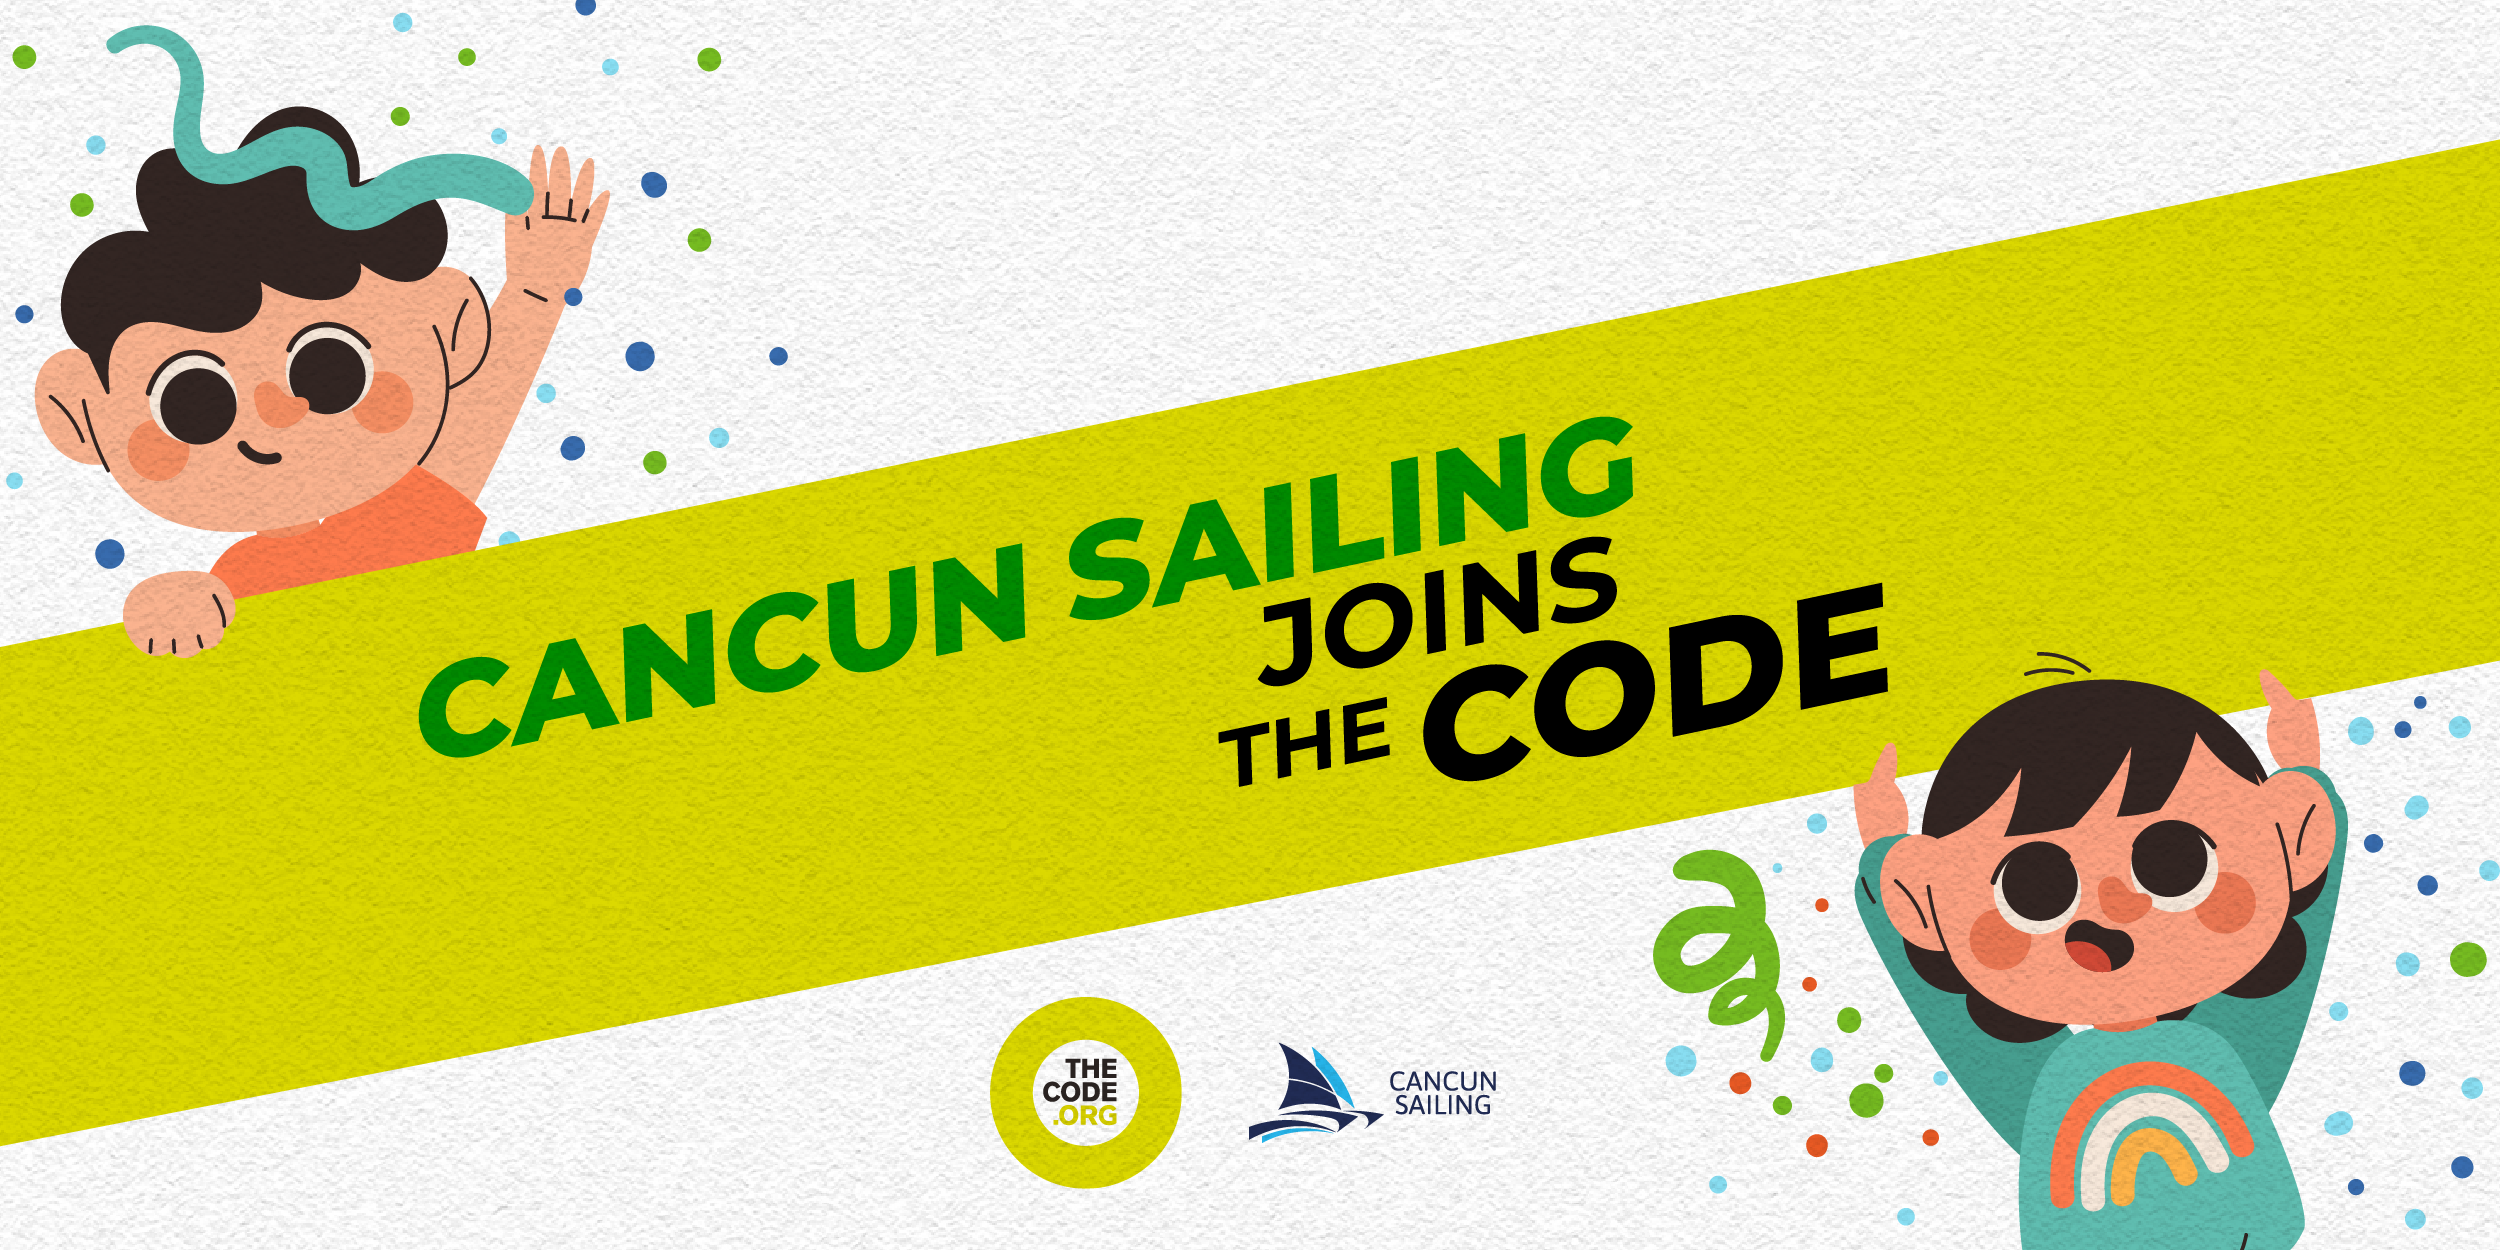 Cancun Sailing joins The Code